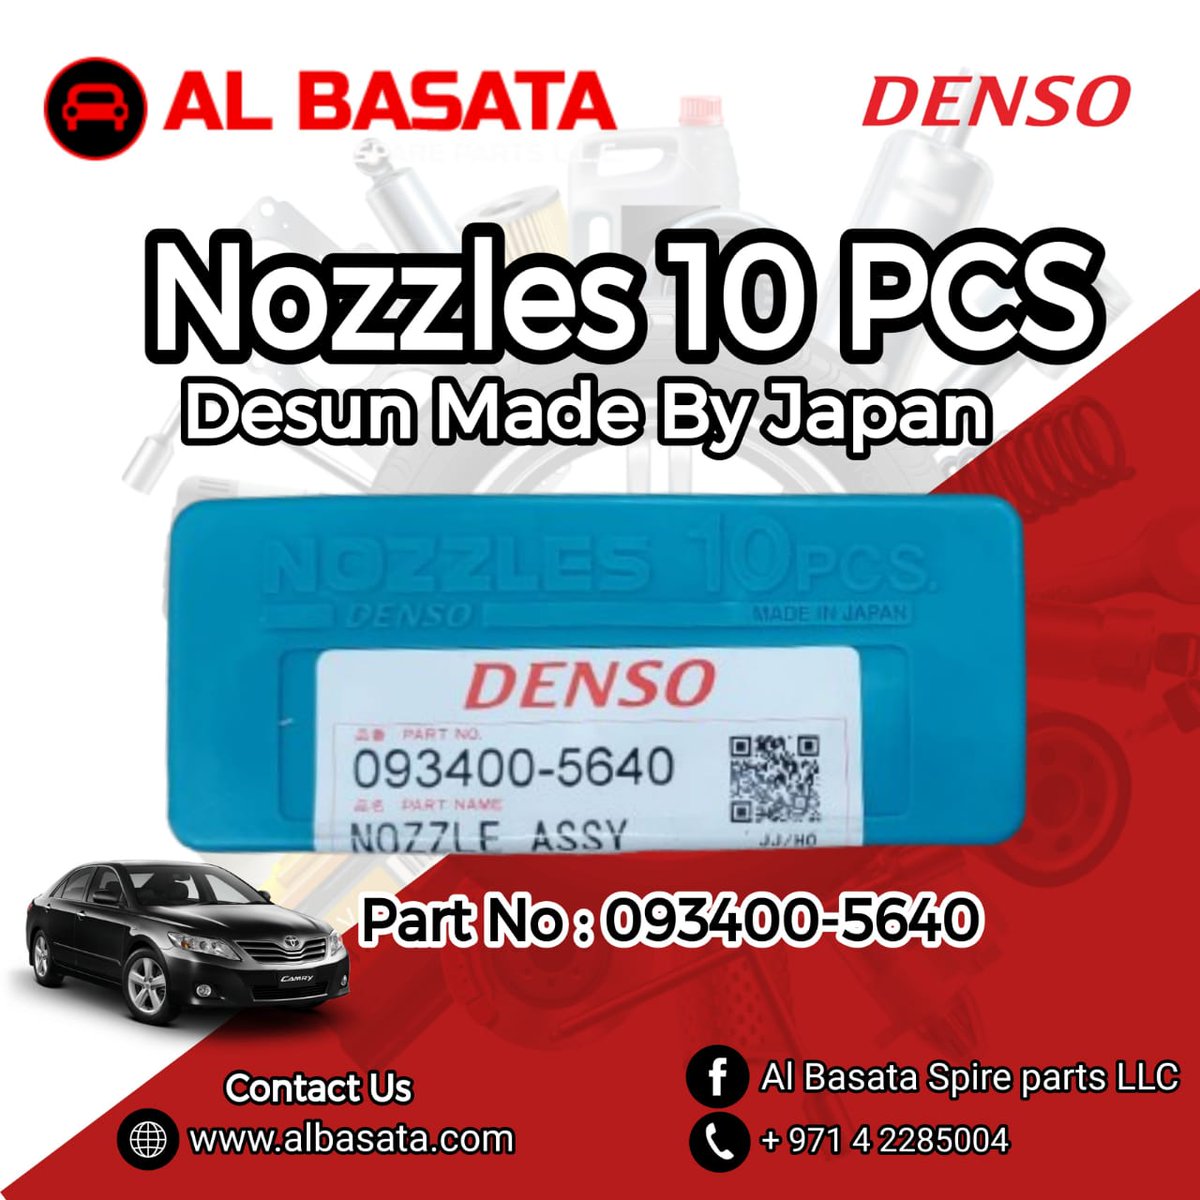 🚗 Upgrade your vehicle's performance with Al basata's premium auto parts! 💪 Introducing our top-of-the-line Denso Nozzles (10 pcs),  🇯🇵 Part number 093400-5640 ensures compatibility and reliability, 🔧 #AutoParts #DensoNozzles #PremiumQuality #Albasata #PerformanceUpgrade 🛠️